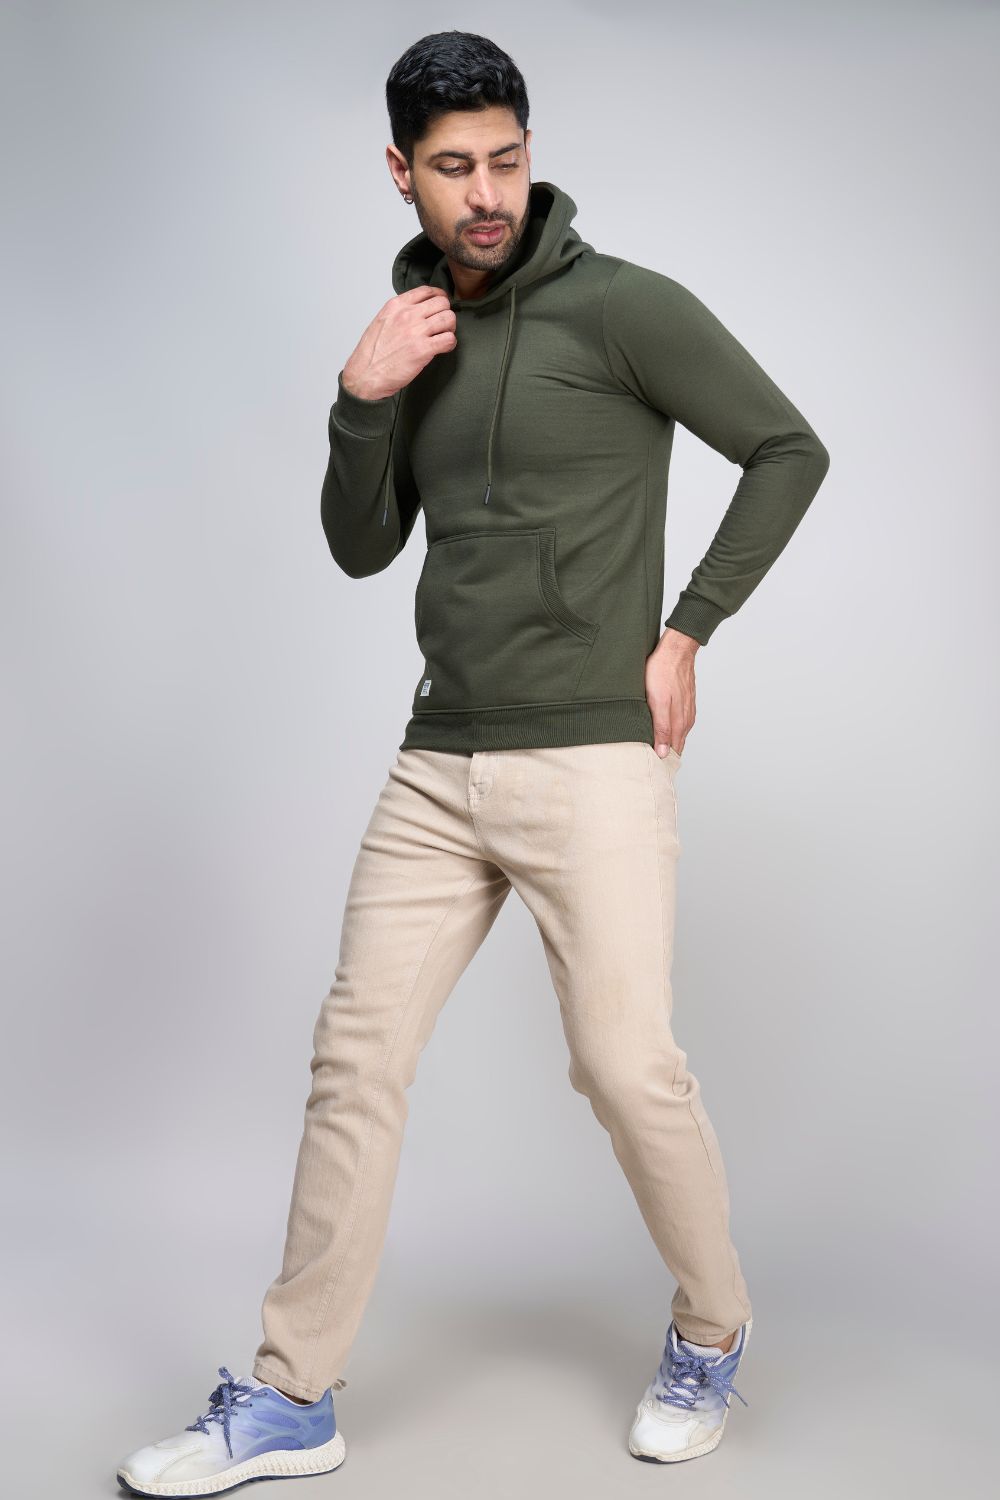 A model wearing Olive colored, hoodie for men with full sleeves and relaxed fit.